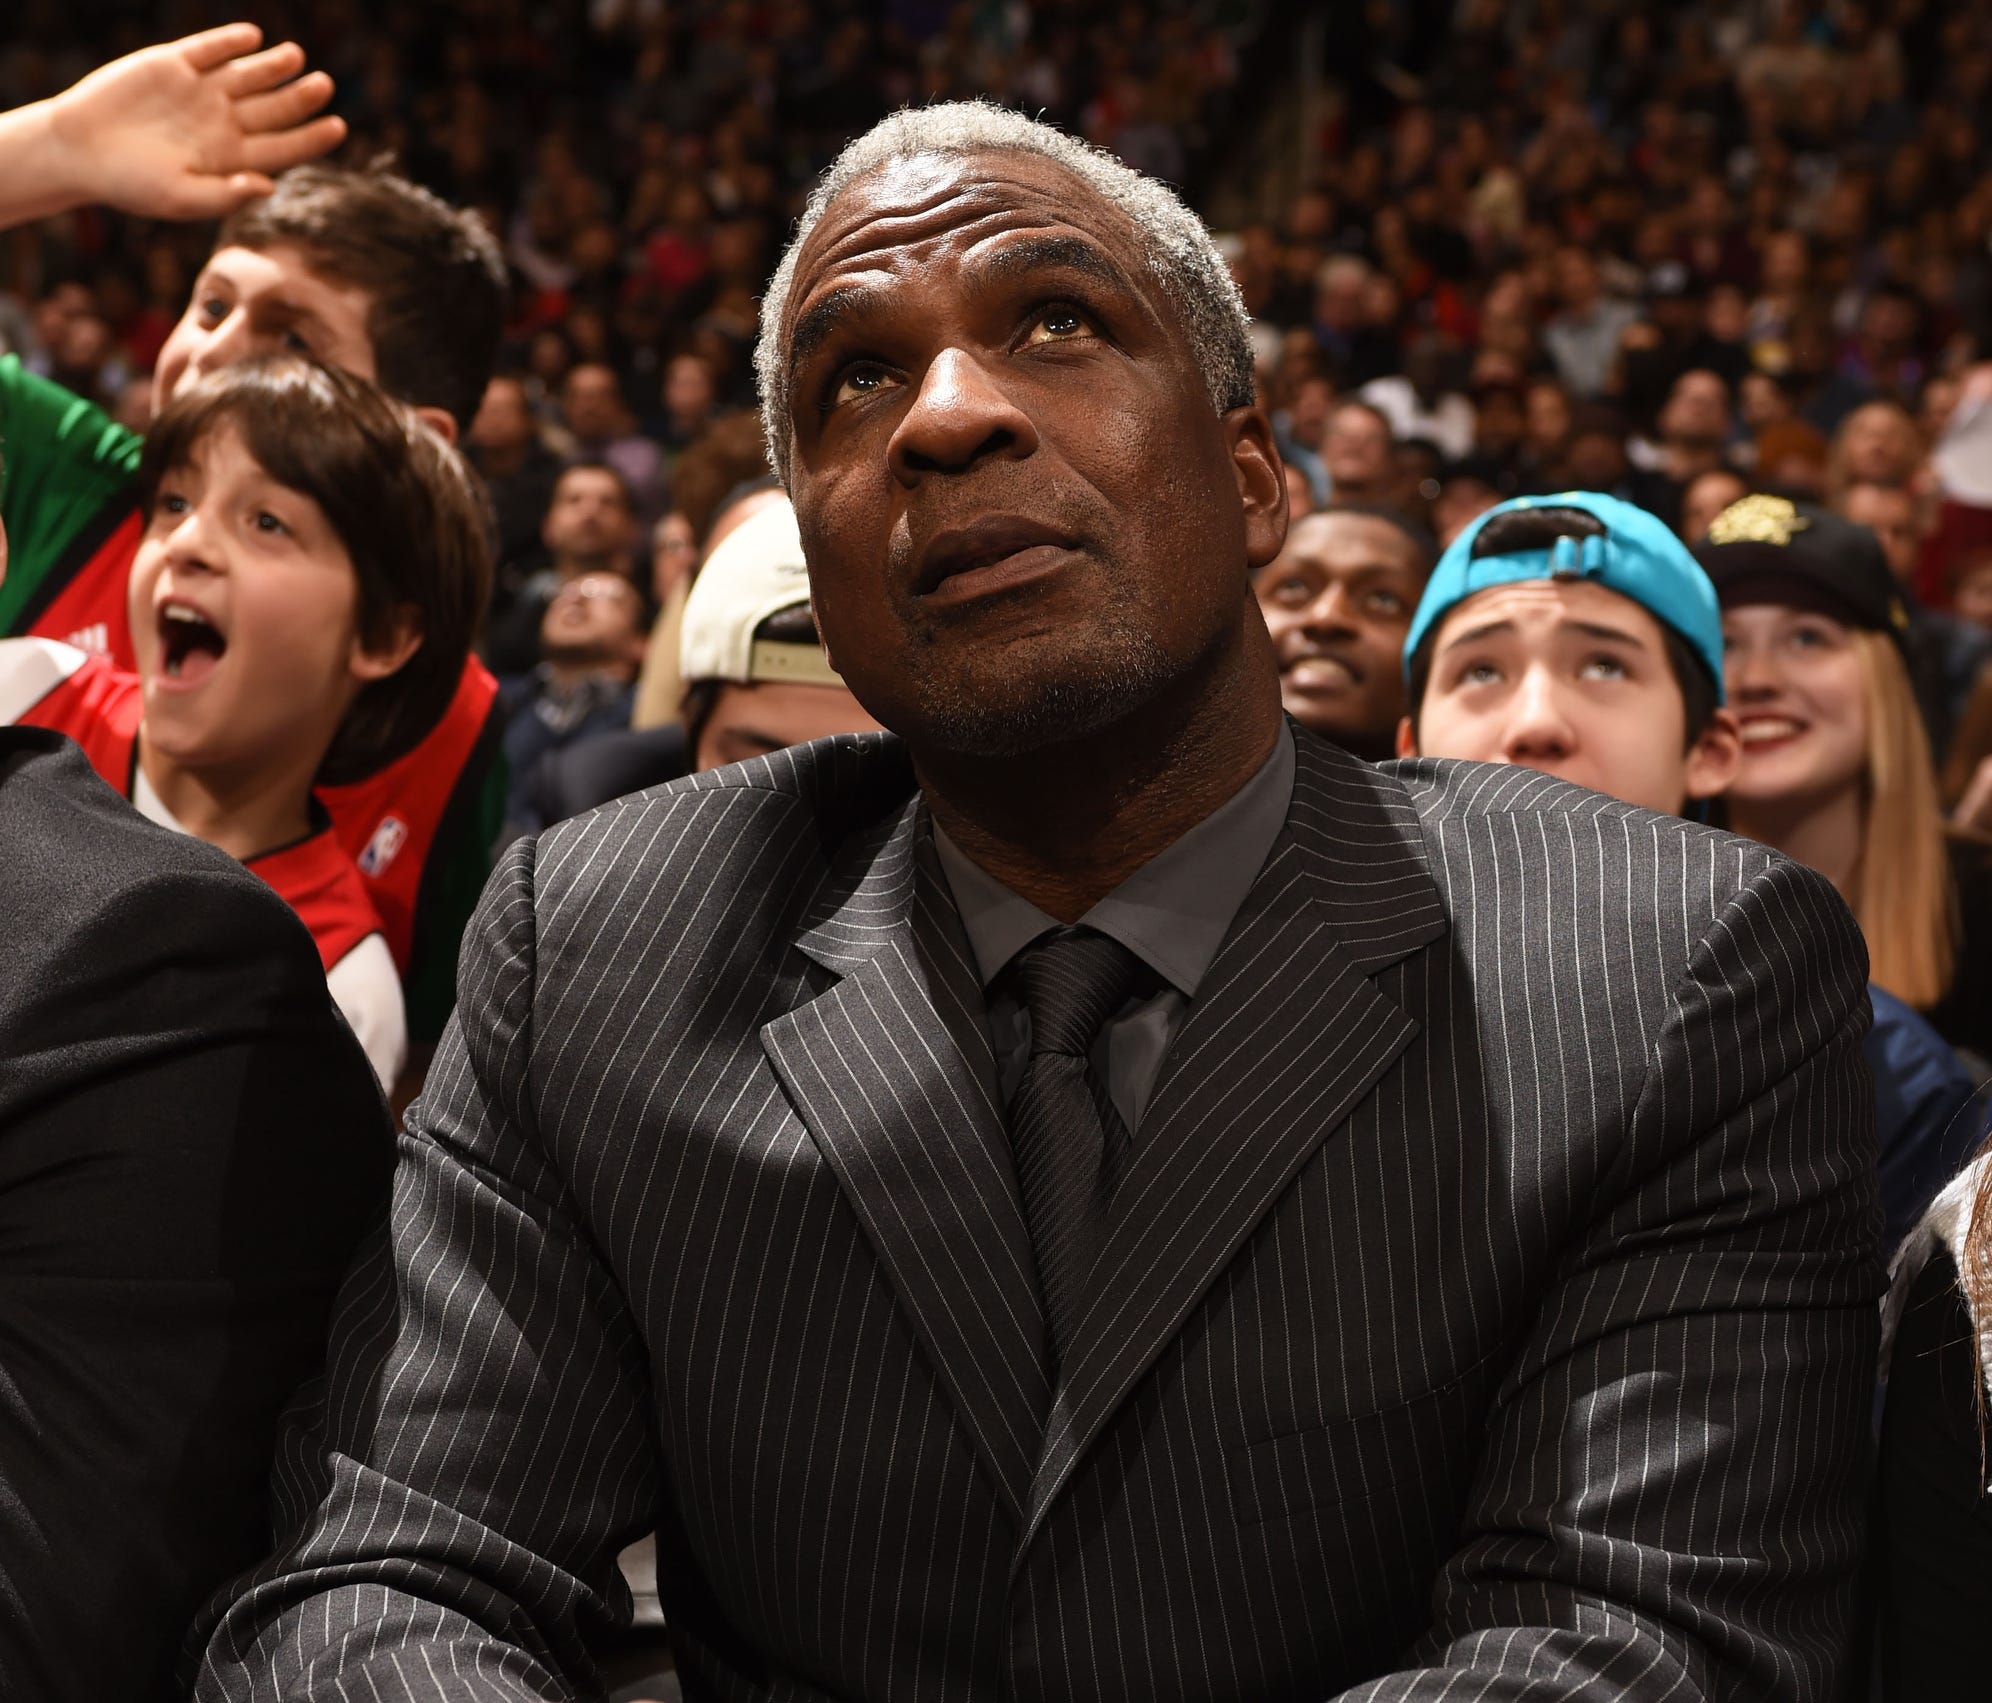 Charles Oakley has been a frequent outspoken critic of Knicks owner James Dolan.